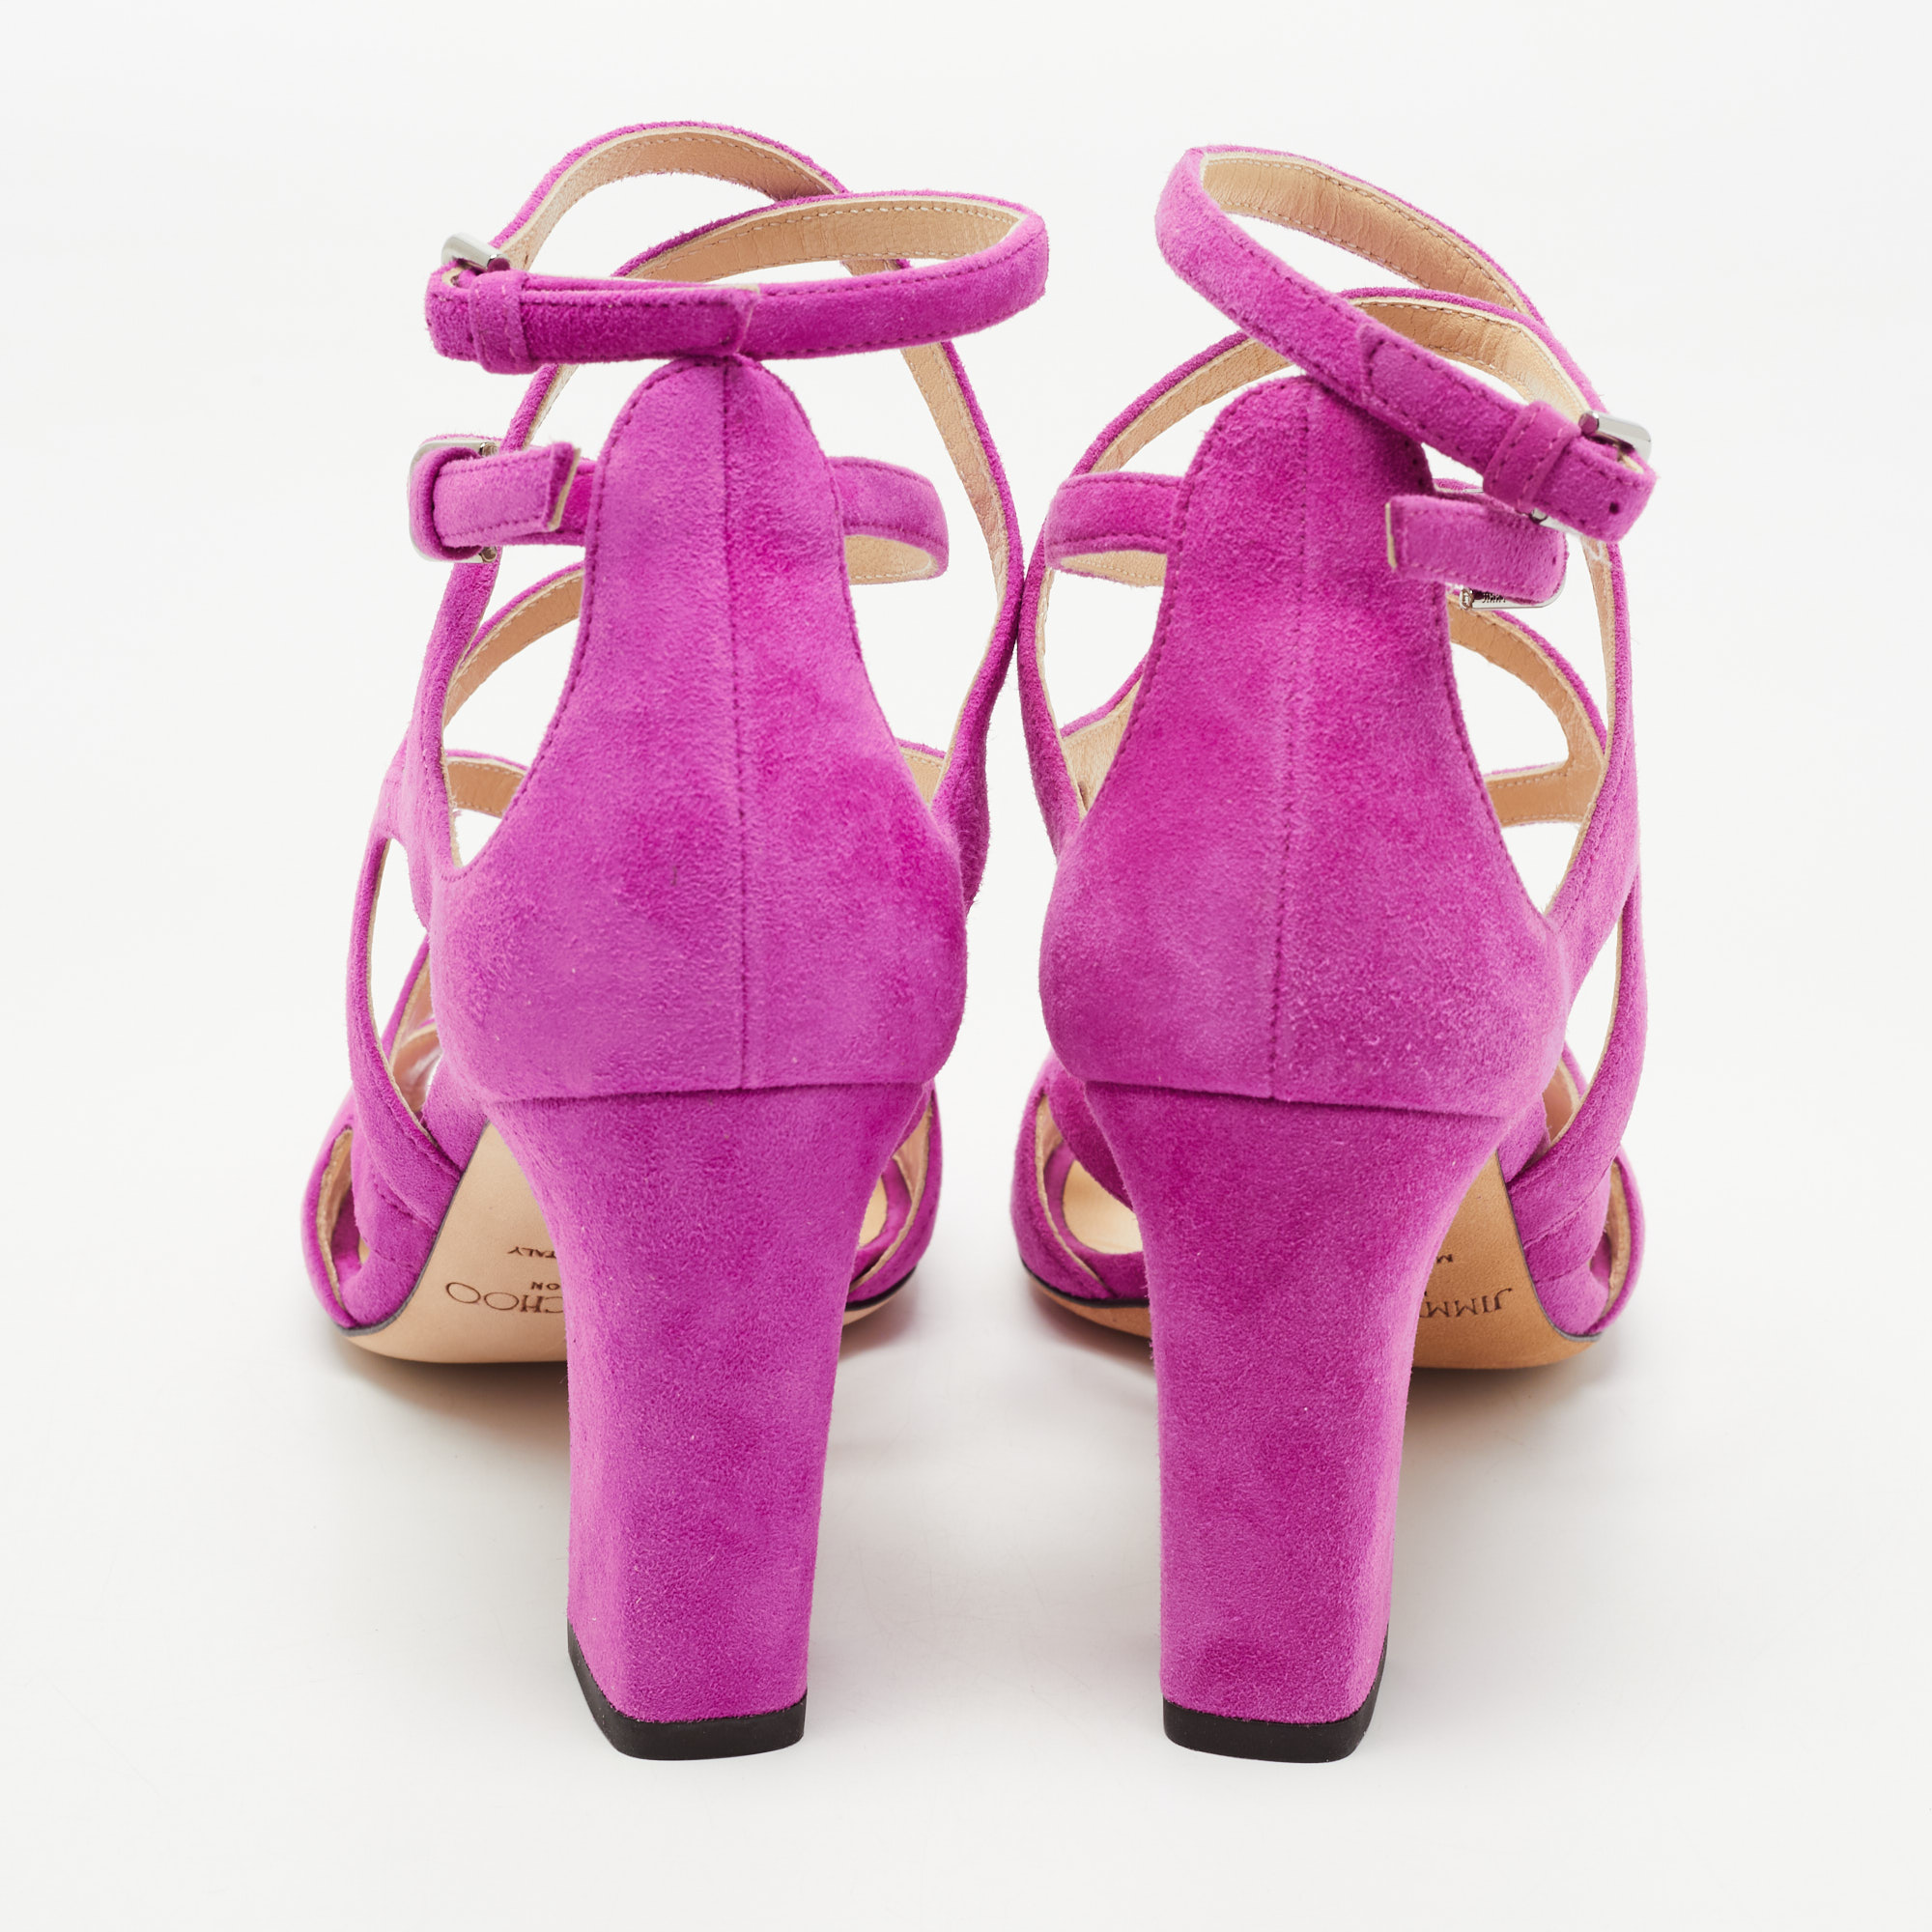 Jimmy Choo Purple Suede Dillan Caged Ankle Strap Sandals Size 36